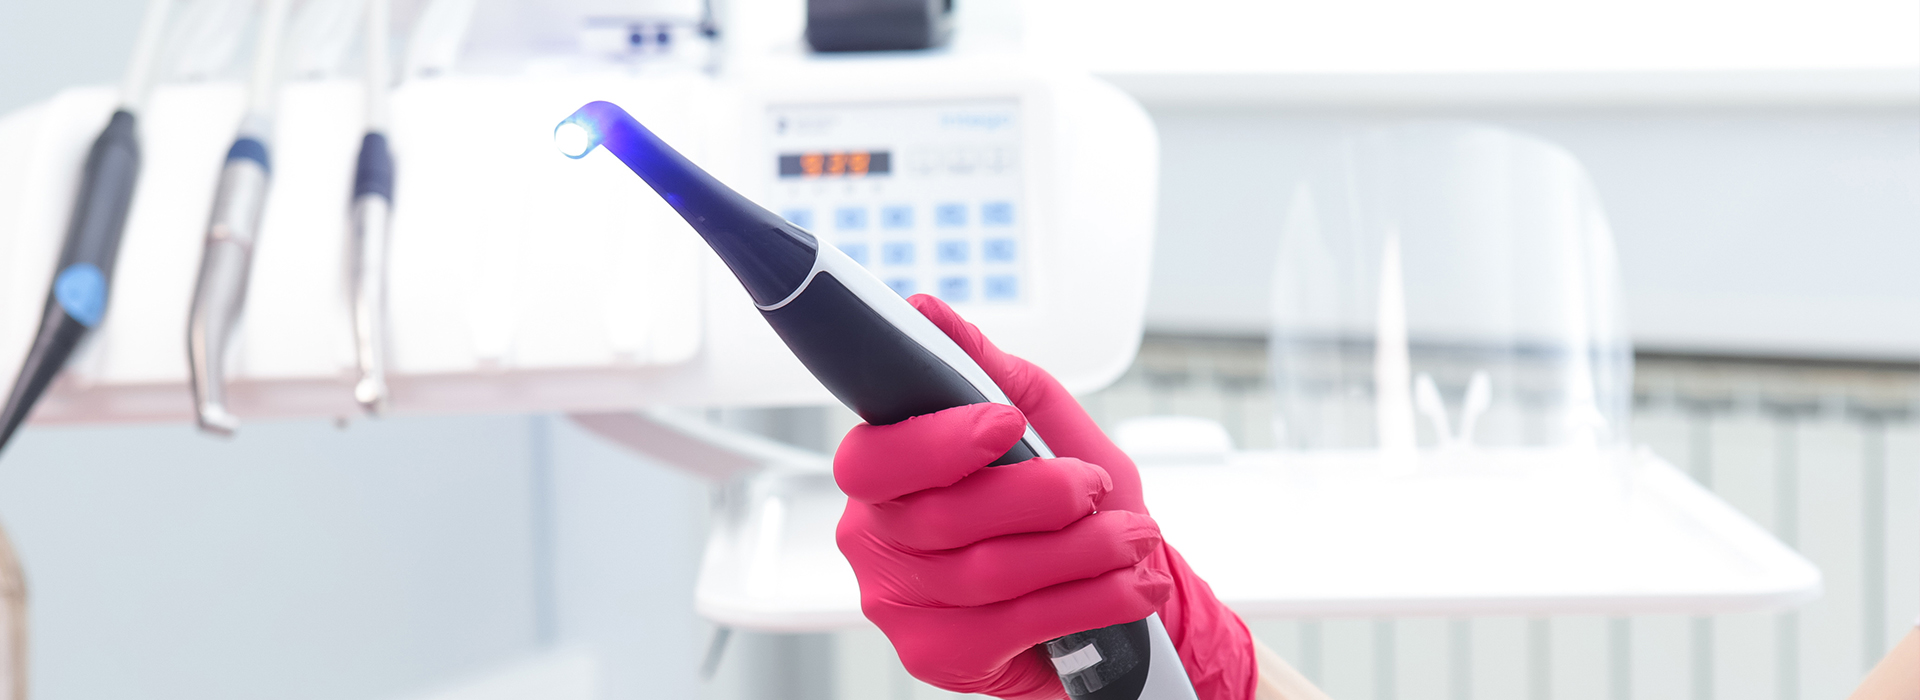 The image shows a person in a medical or dental setting, holding a blue device that appears to be a handheld ultrasonic cleaning tool. They are wearing pink gloves and are focused on the task at hand.